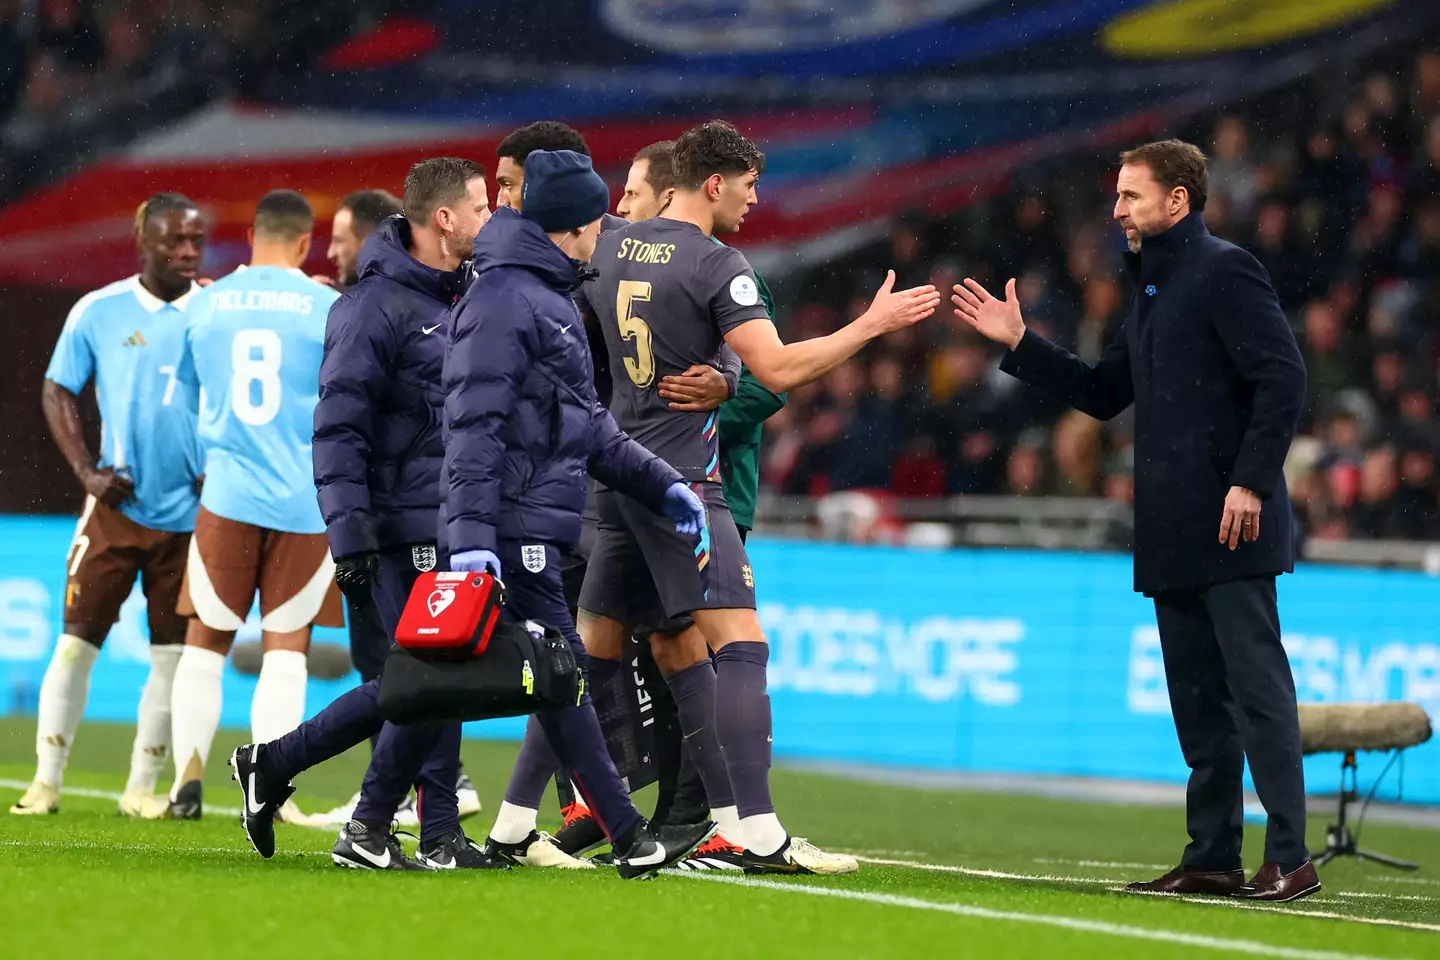 Gareth Southgate speaks to John Stones as he leaves the pitch following an injury. Image: Getty